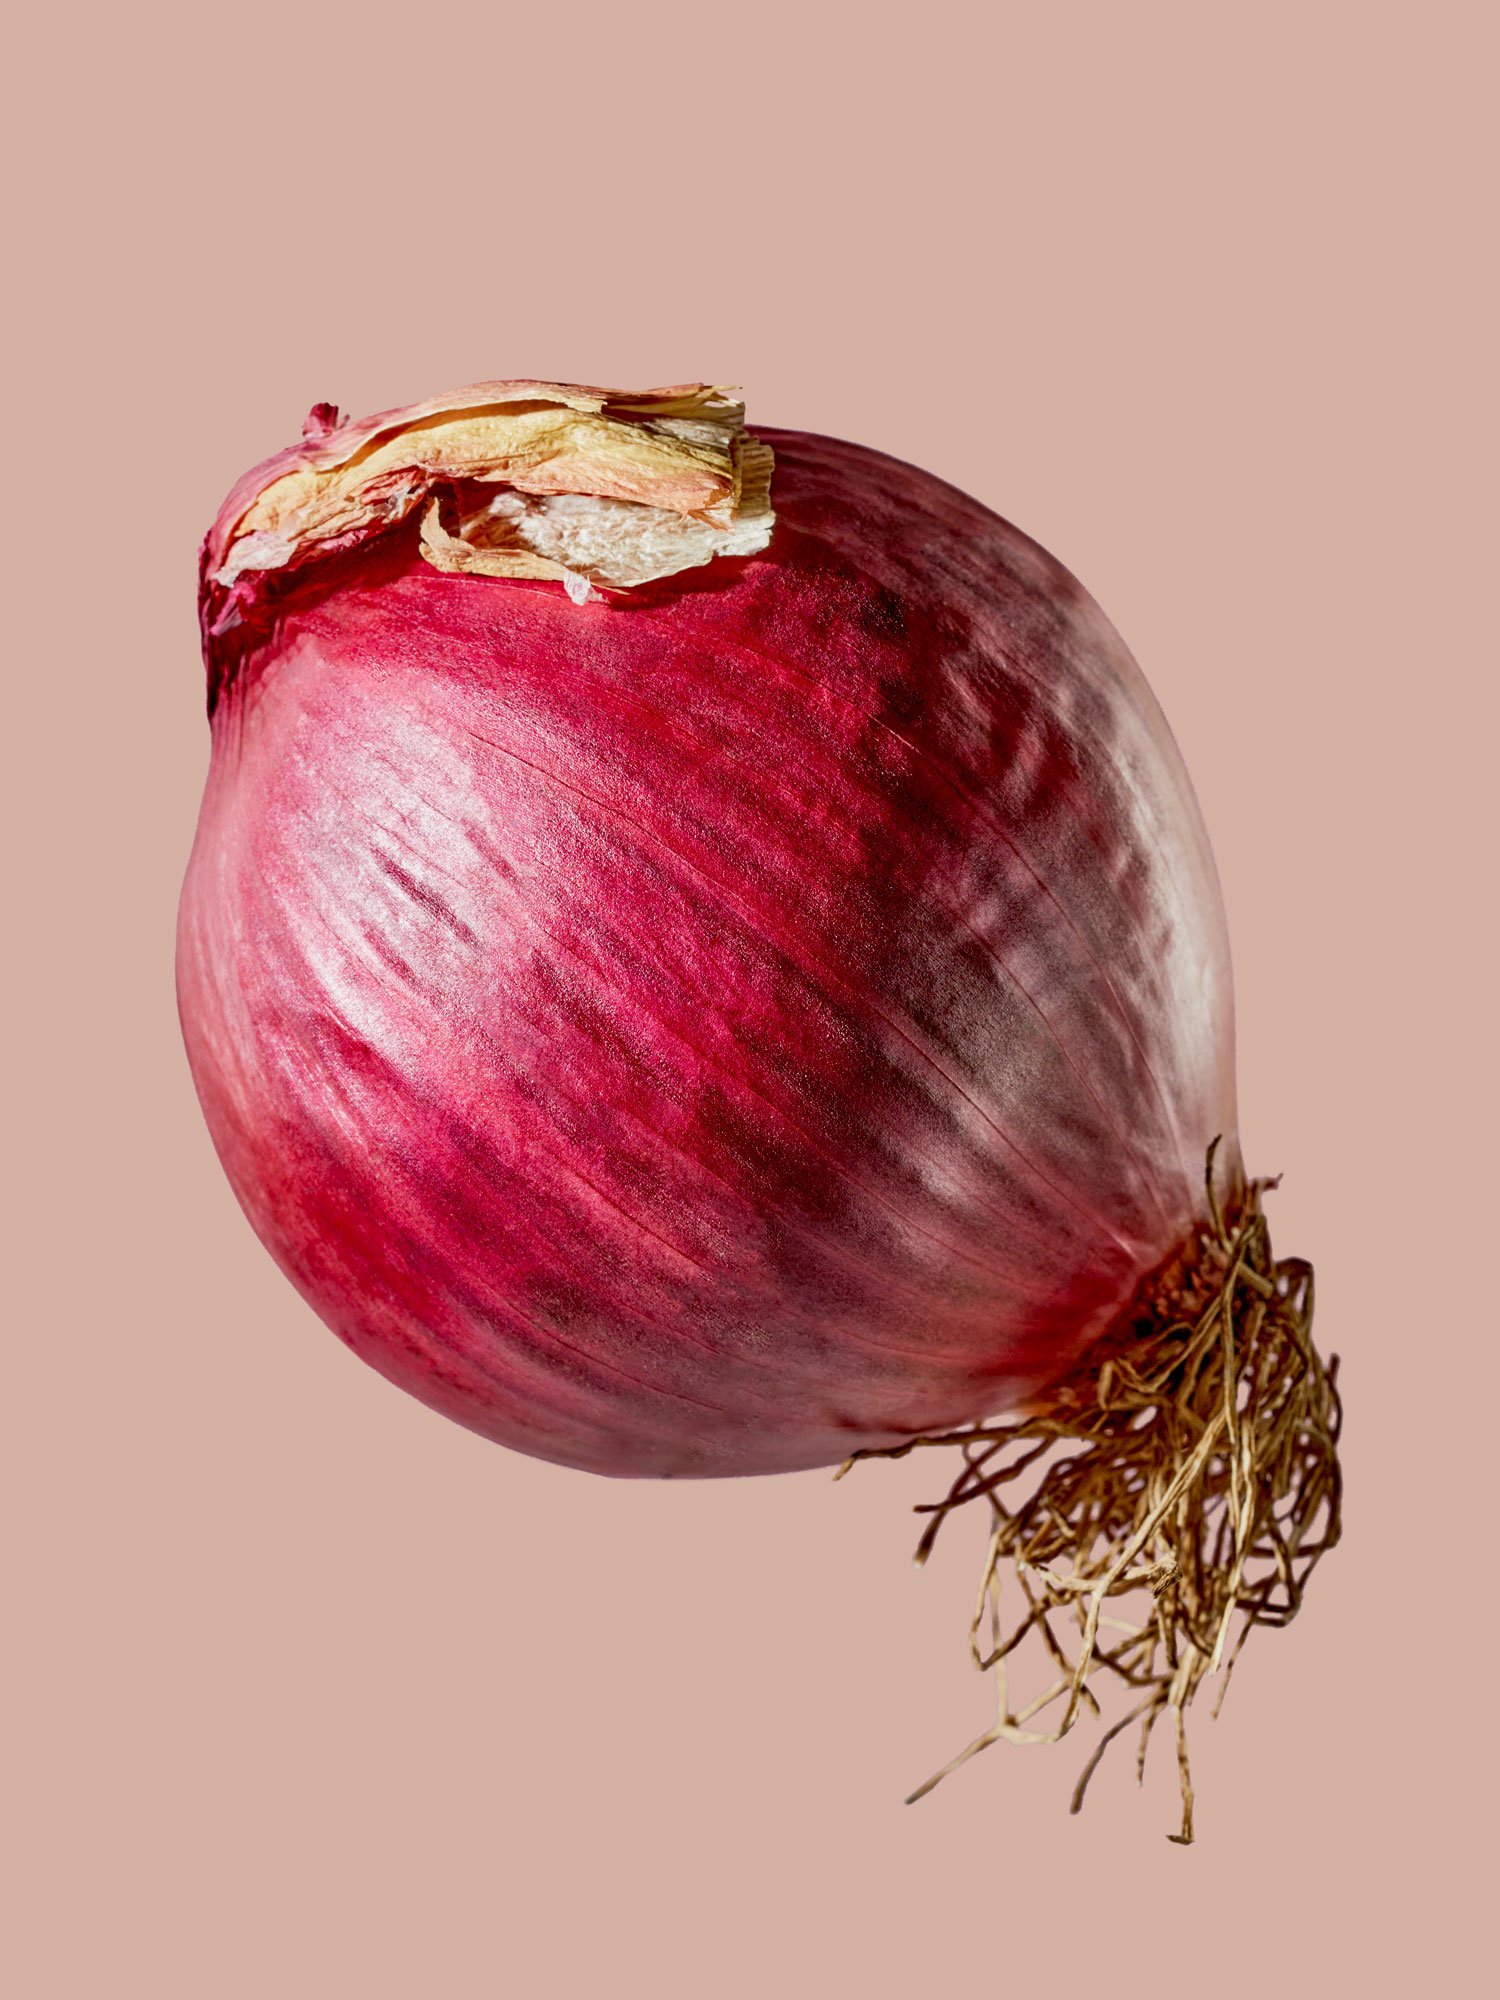 SIMPLE RED ONION